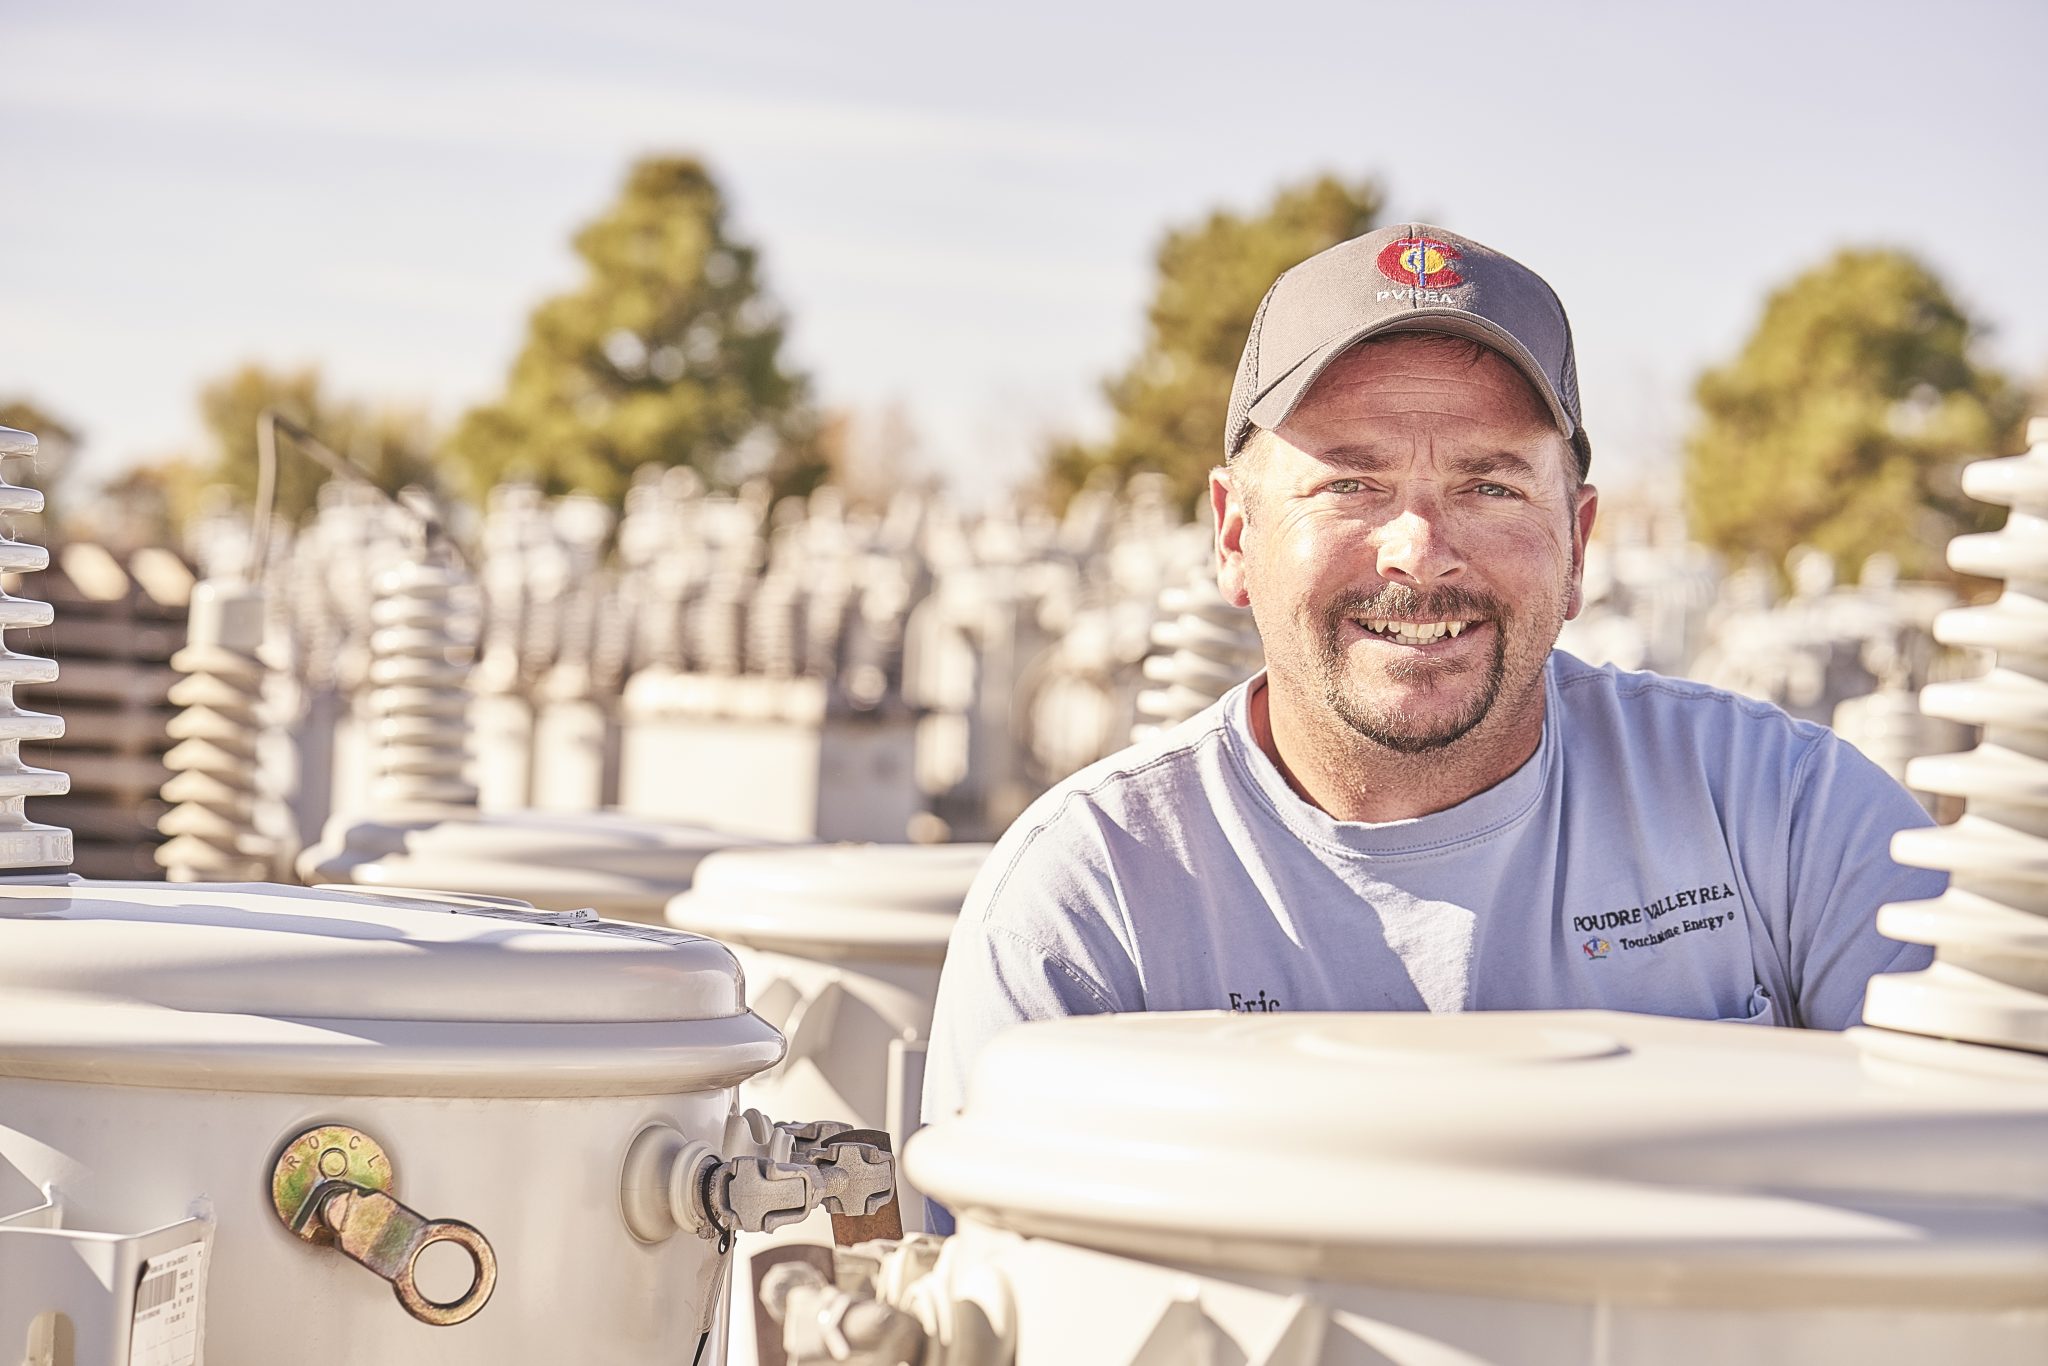 A photo of a co-op employee standing behind electric transformers